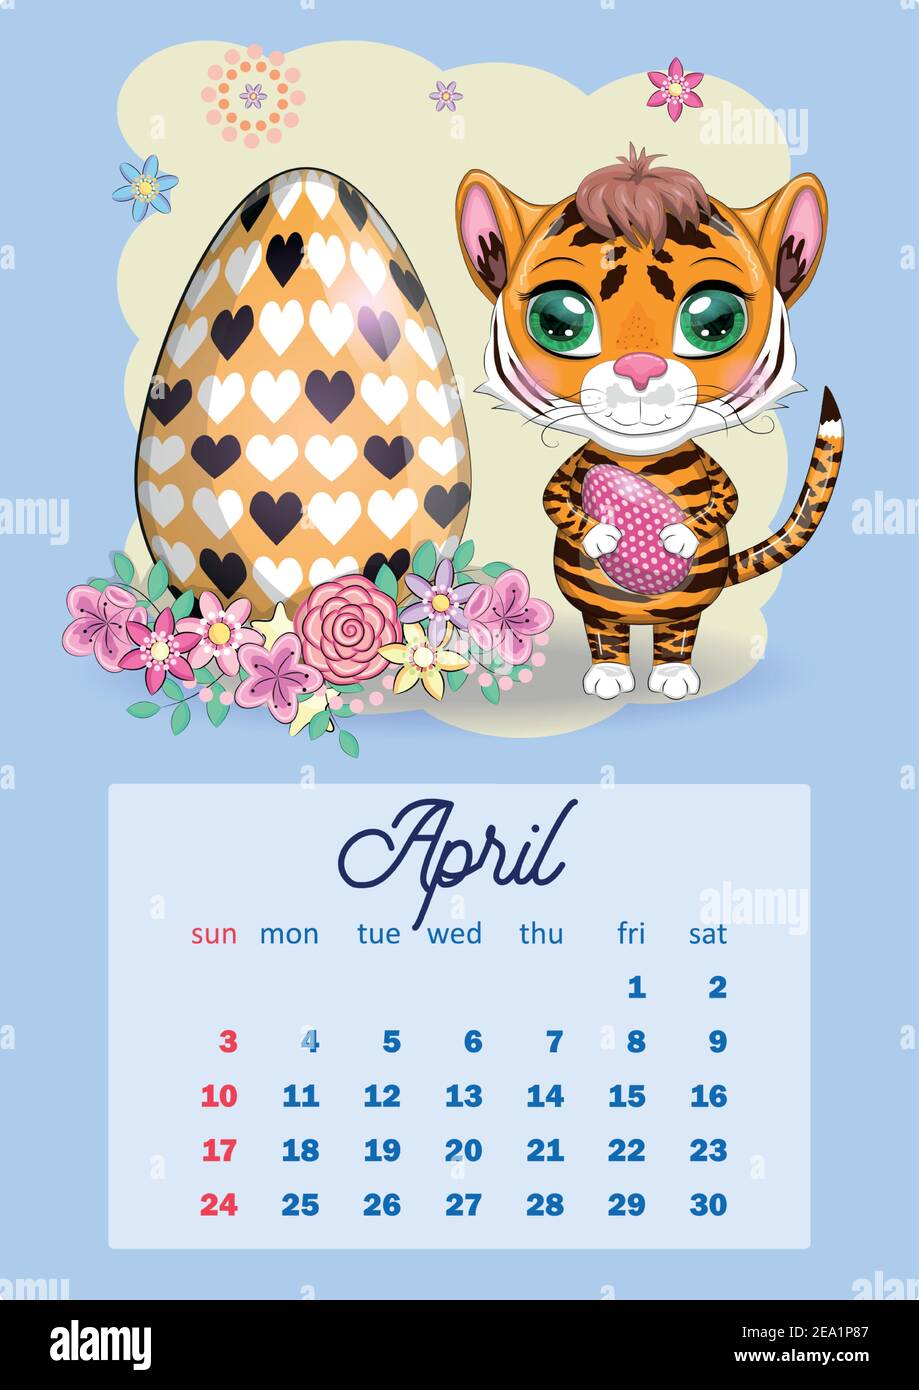 Cute Tiger Wall Calendar Design Template For 2022 Year Of The Tiger According To The Chinese Calendar A4 Format Week Starts On Sunday Stock Vector Image Art Alamy